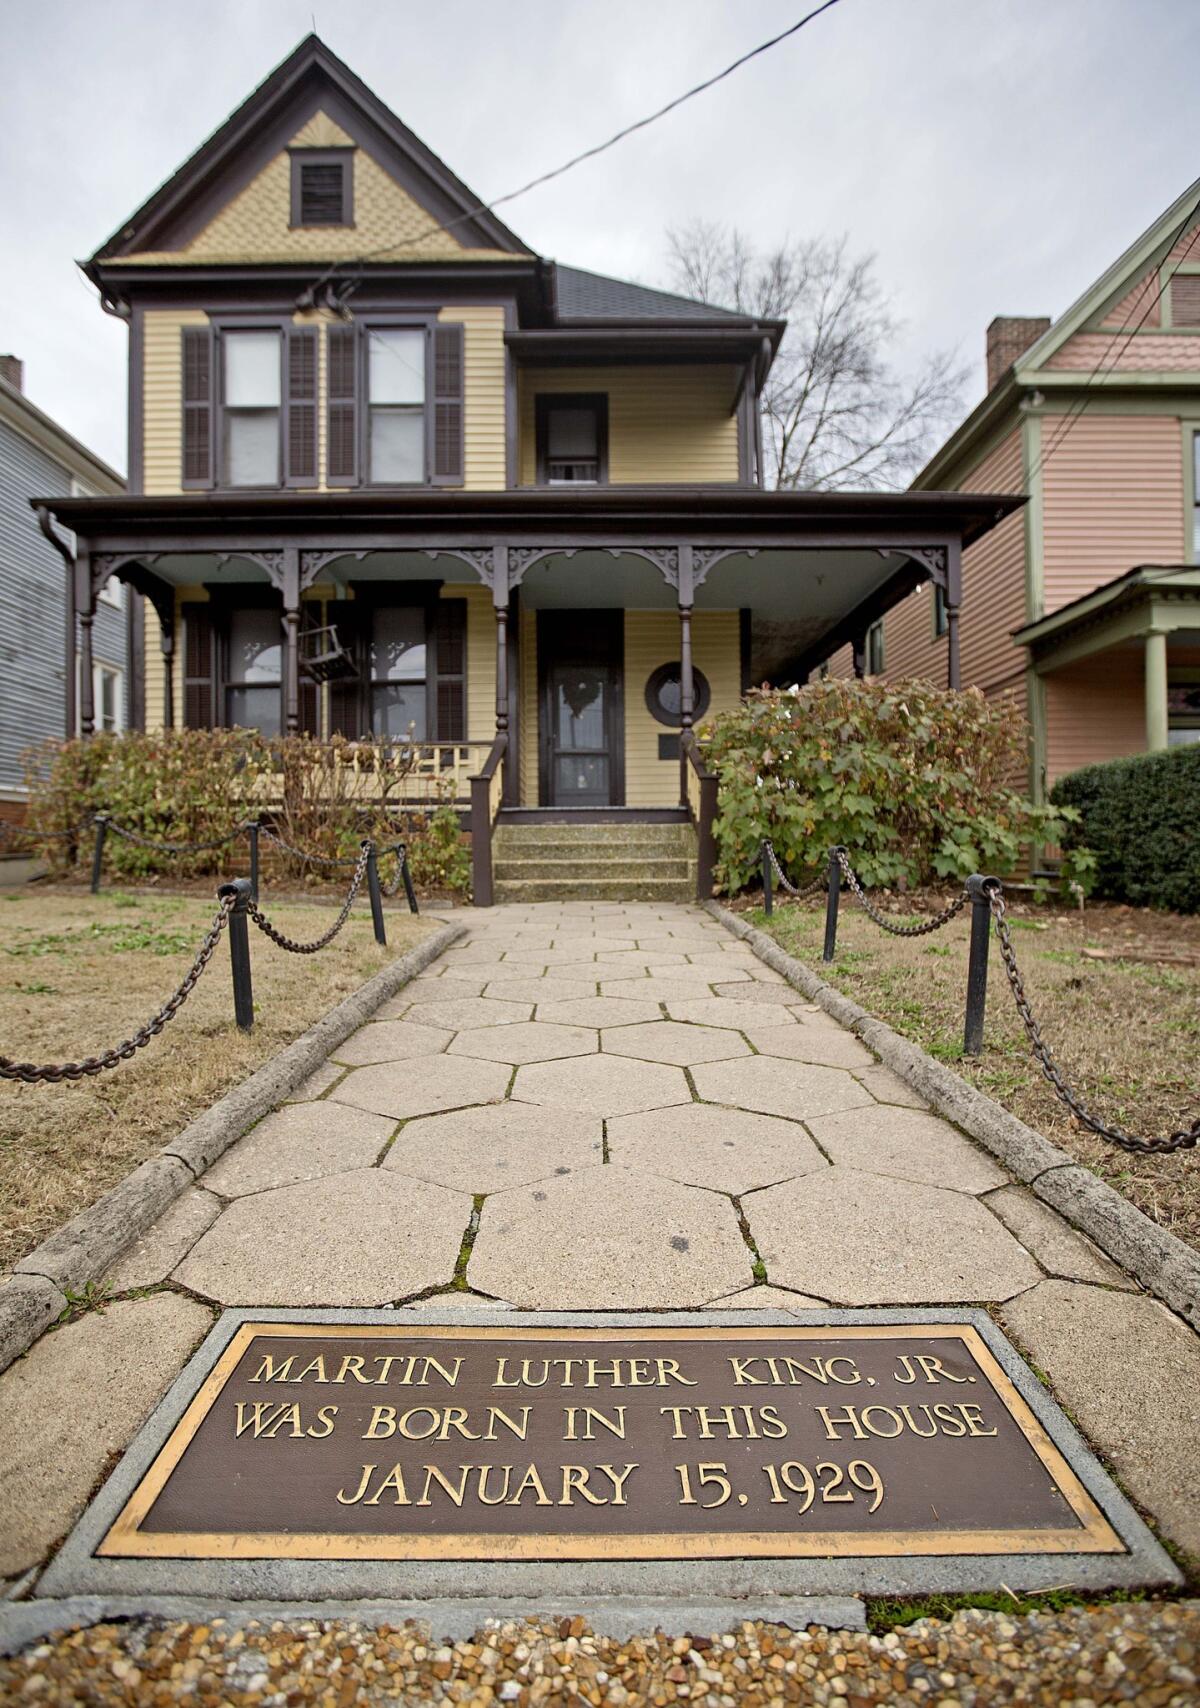 The home where Martin Luther King Jr. was born in the Sweet Auburn historic district in Atlanta.